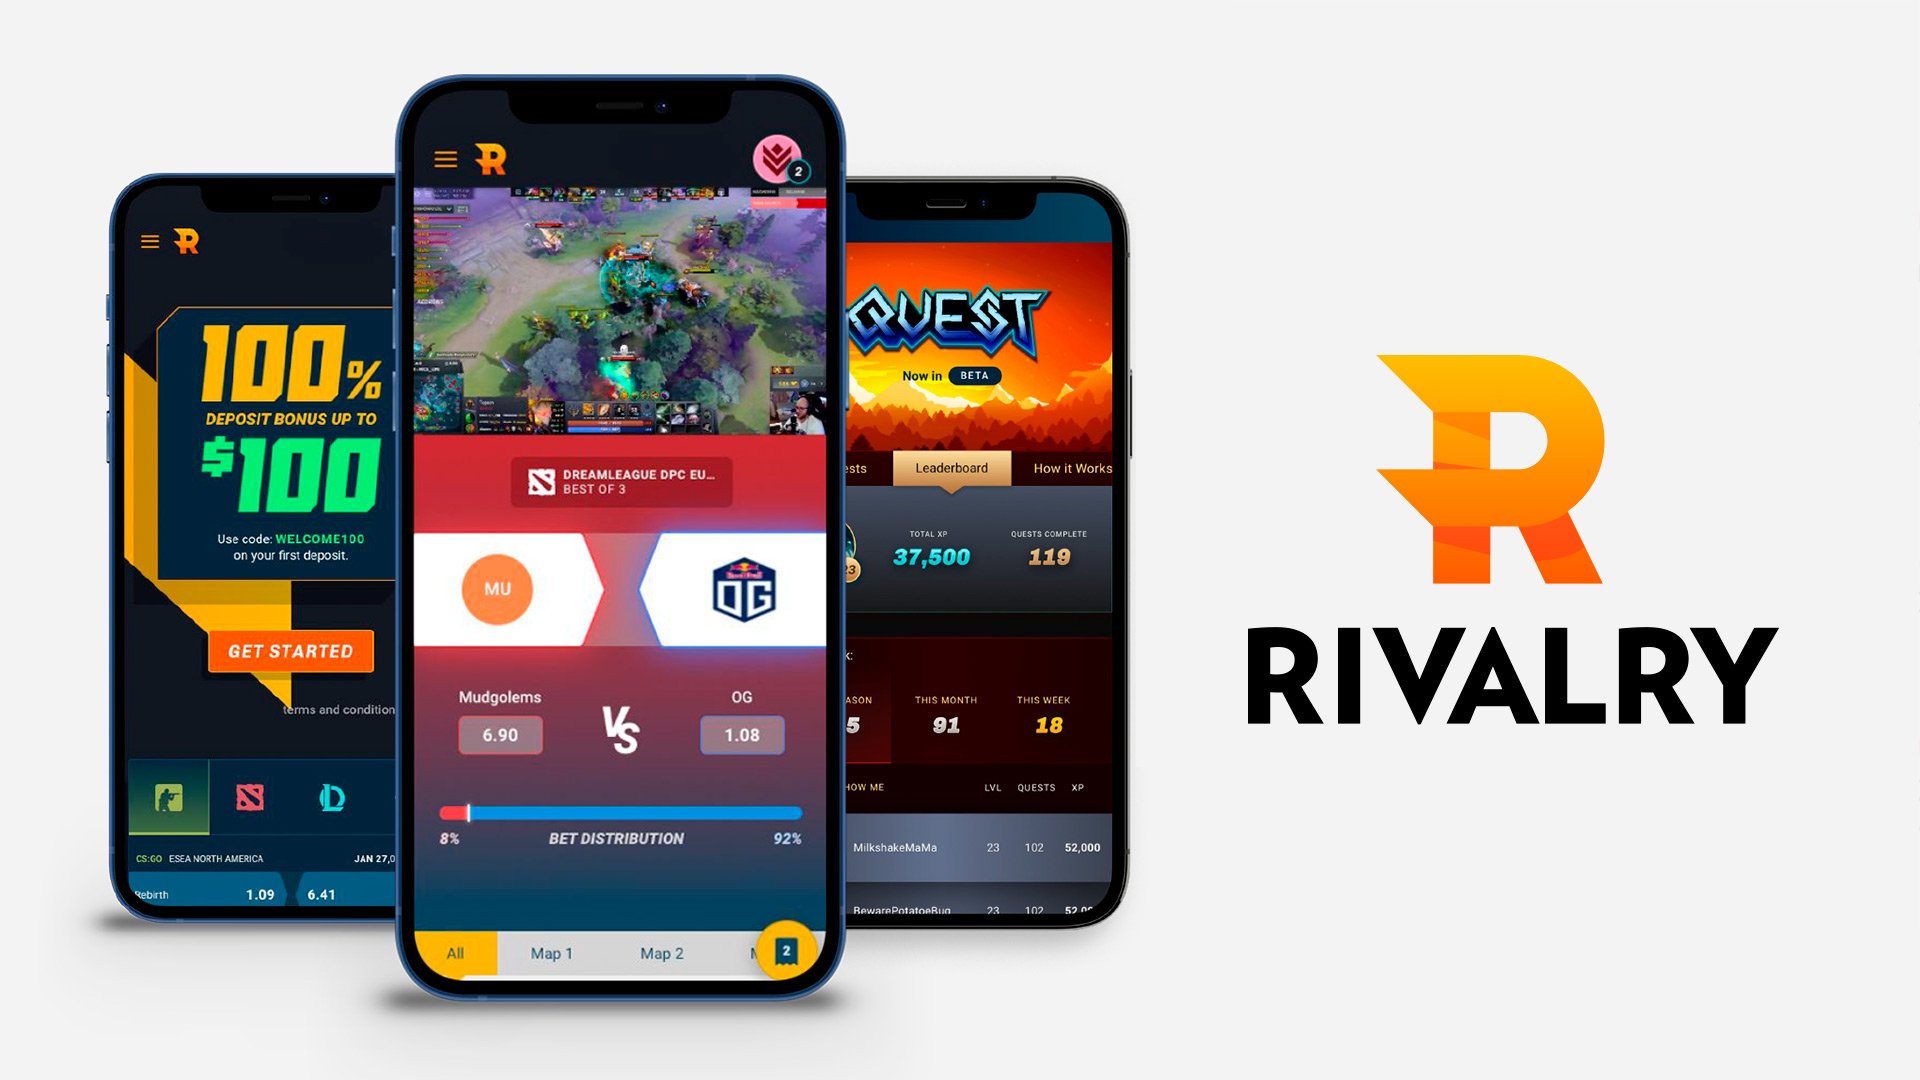 Rivalry posts $4M in revenue, year-over-year growth across core metrics in record-setting Q2